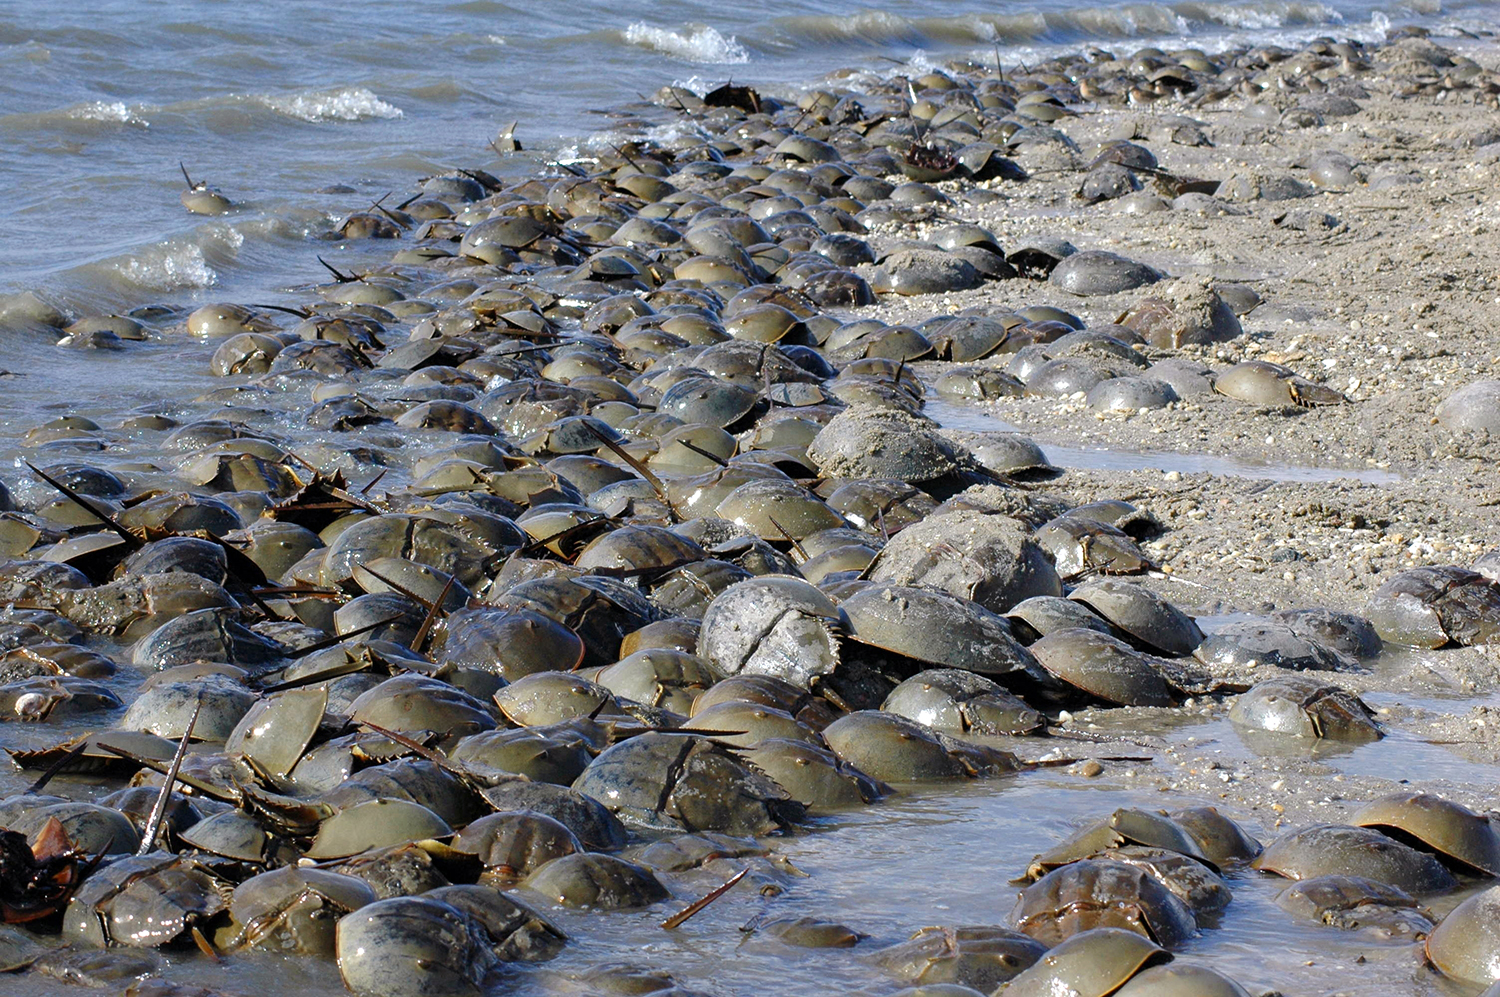 Horseshoe crabs come ashore on sandy beaches en masse to lay their eggs.